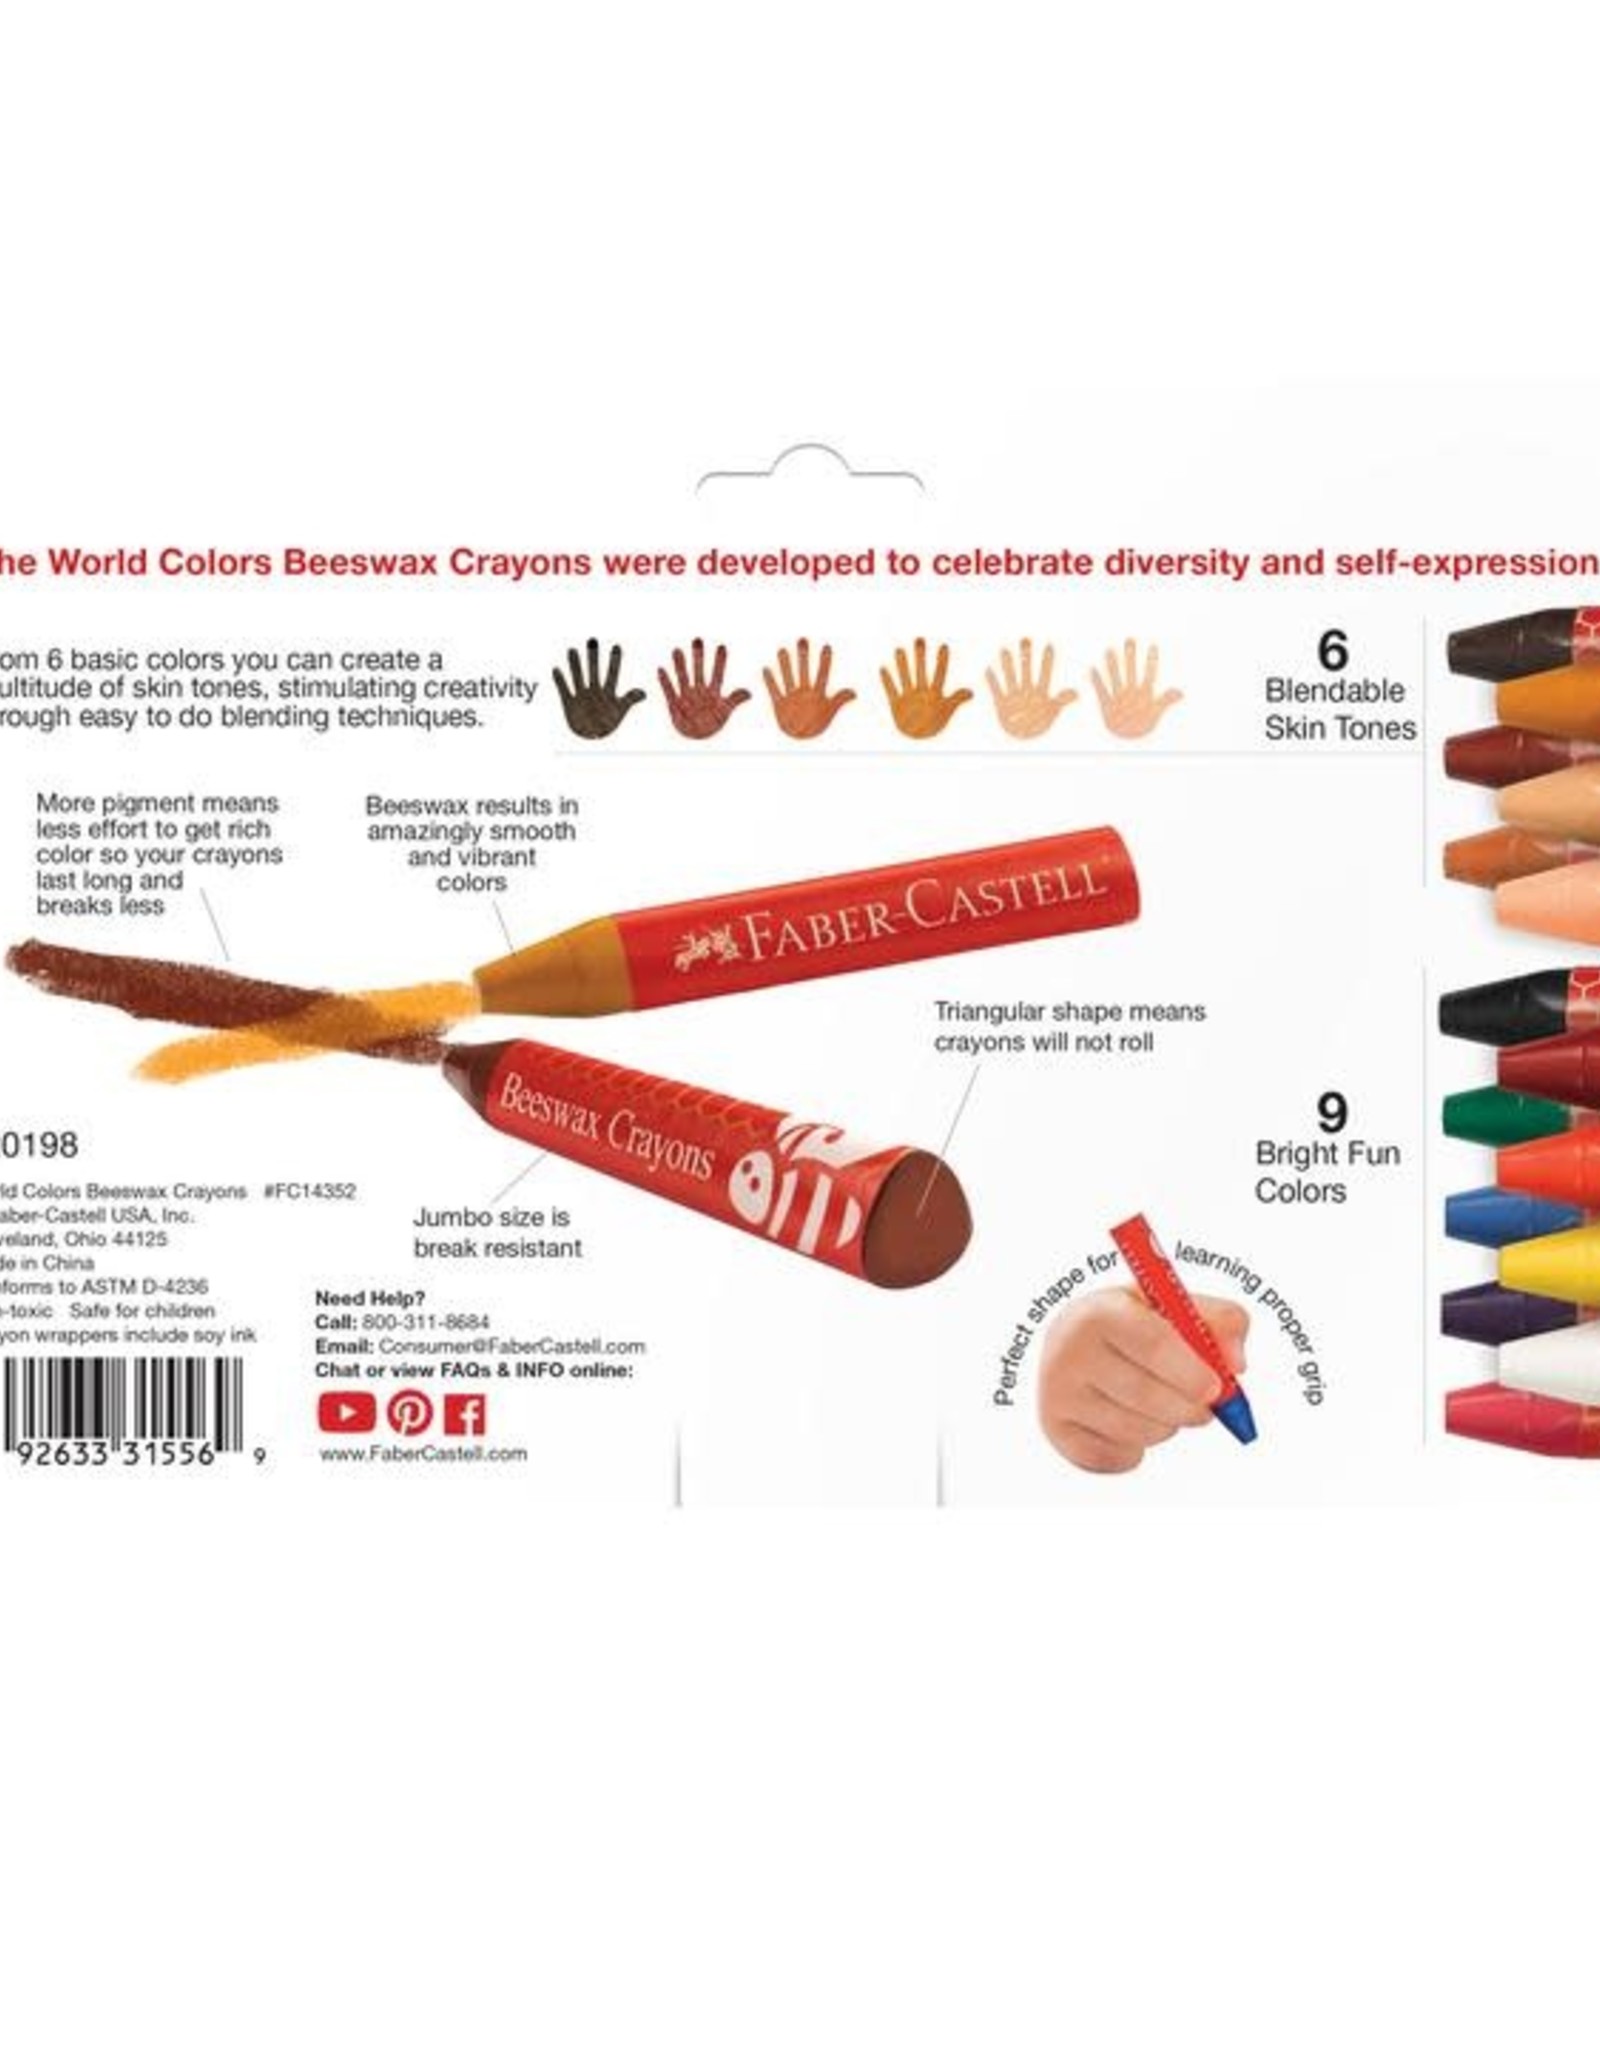 Faber Castell World Colors - 15ct Beeswax Crayons